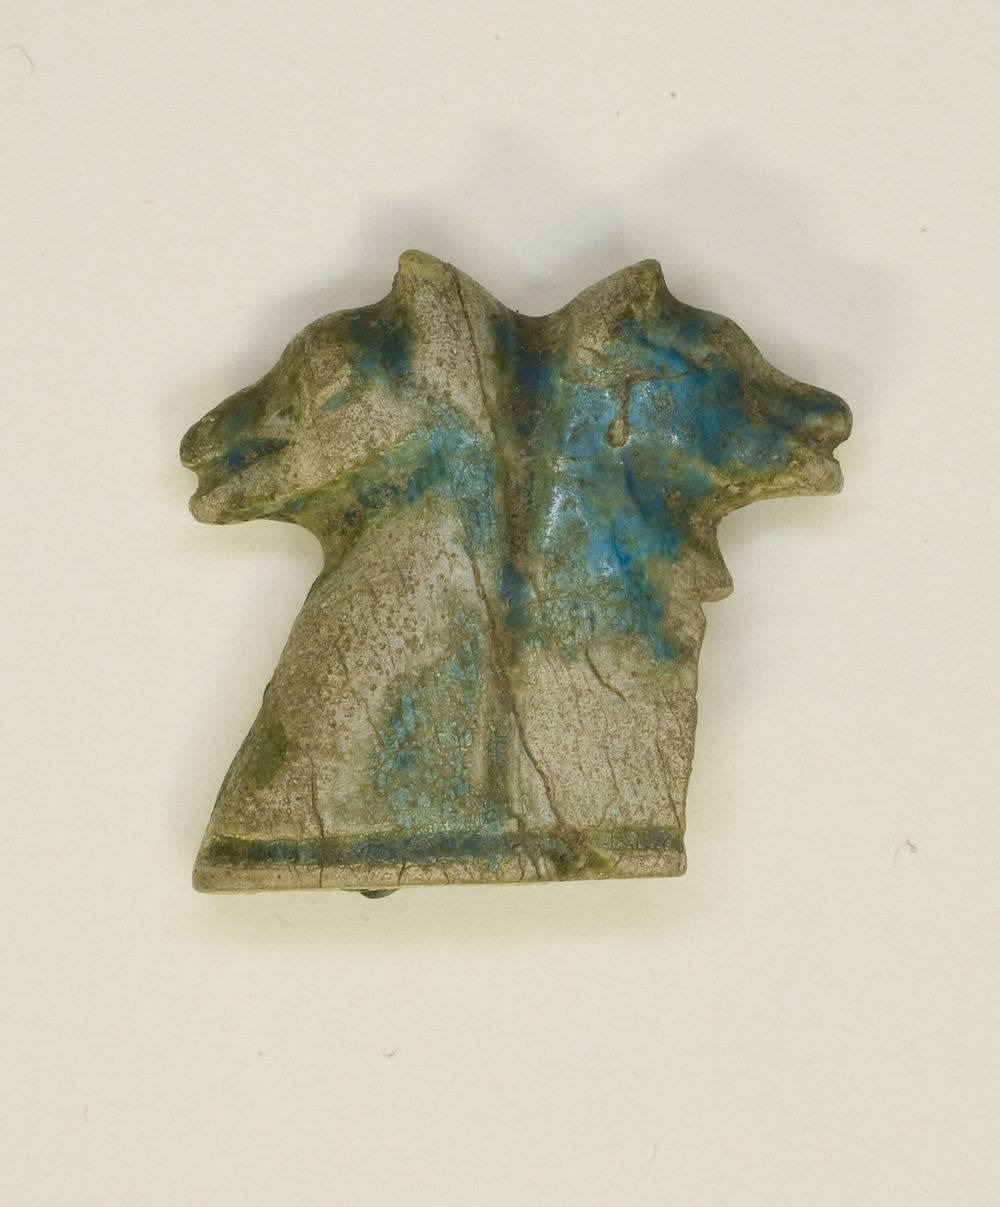 Amulet of Two Back to Back Canine Heads by Ancient Egyptian